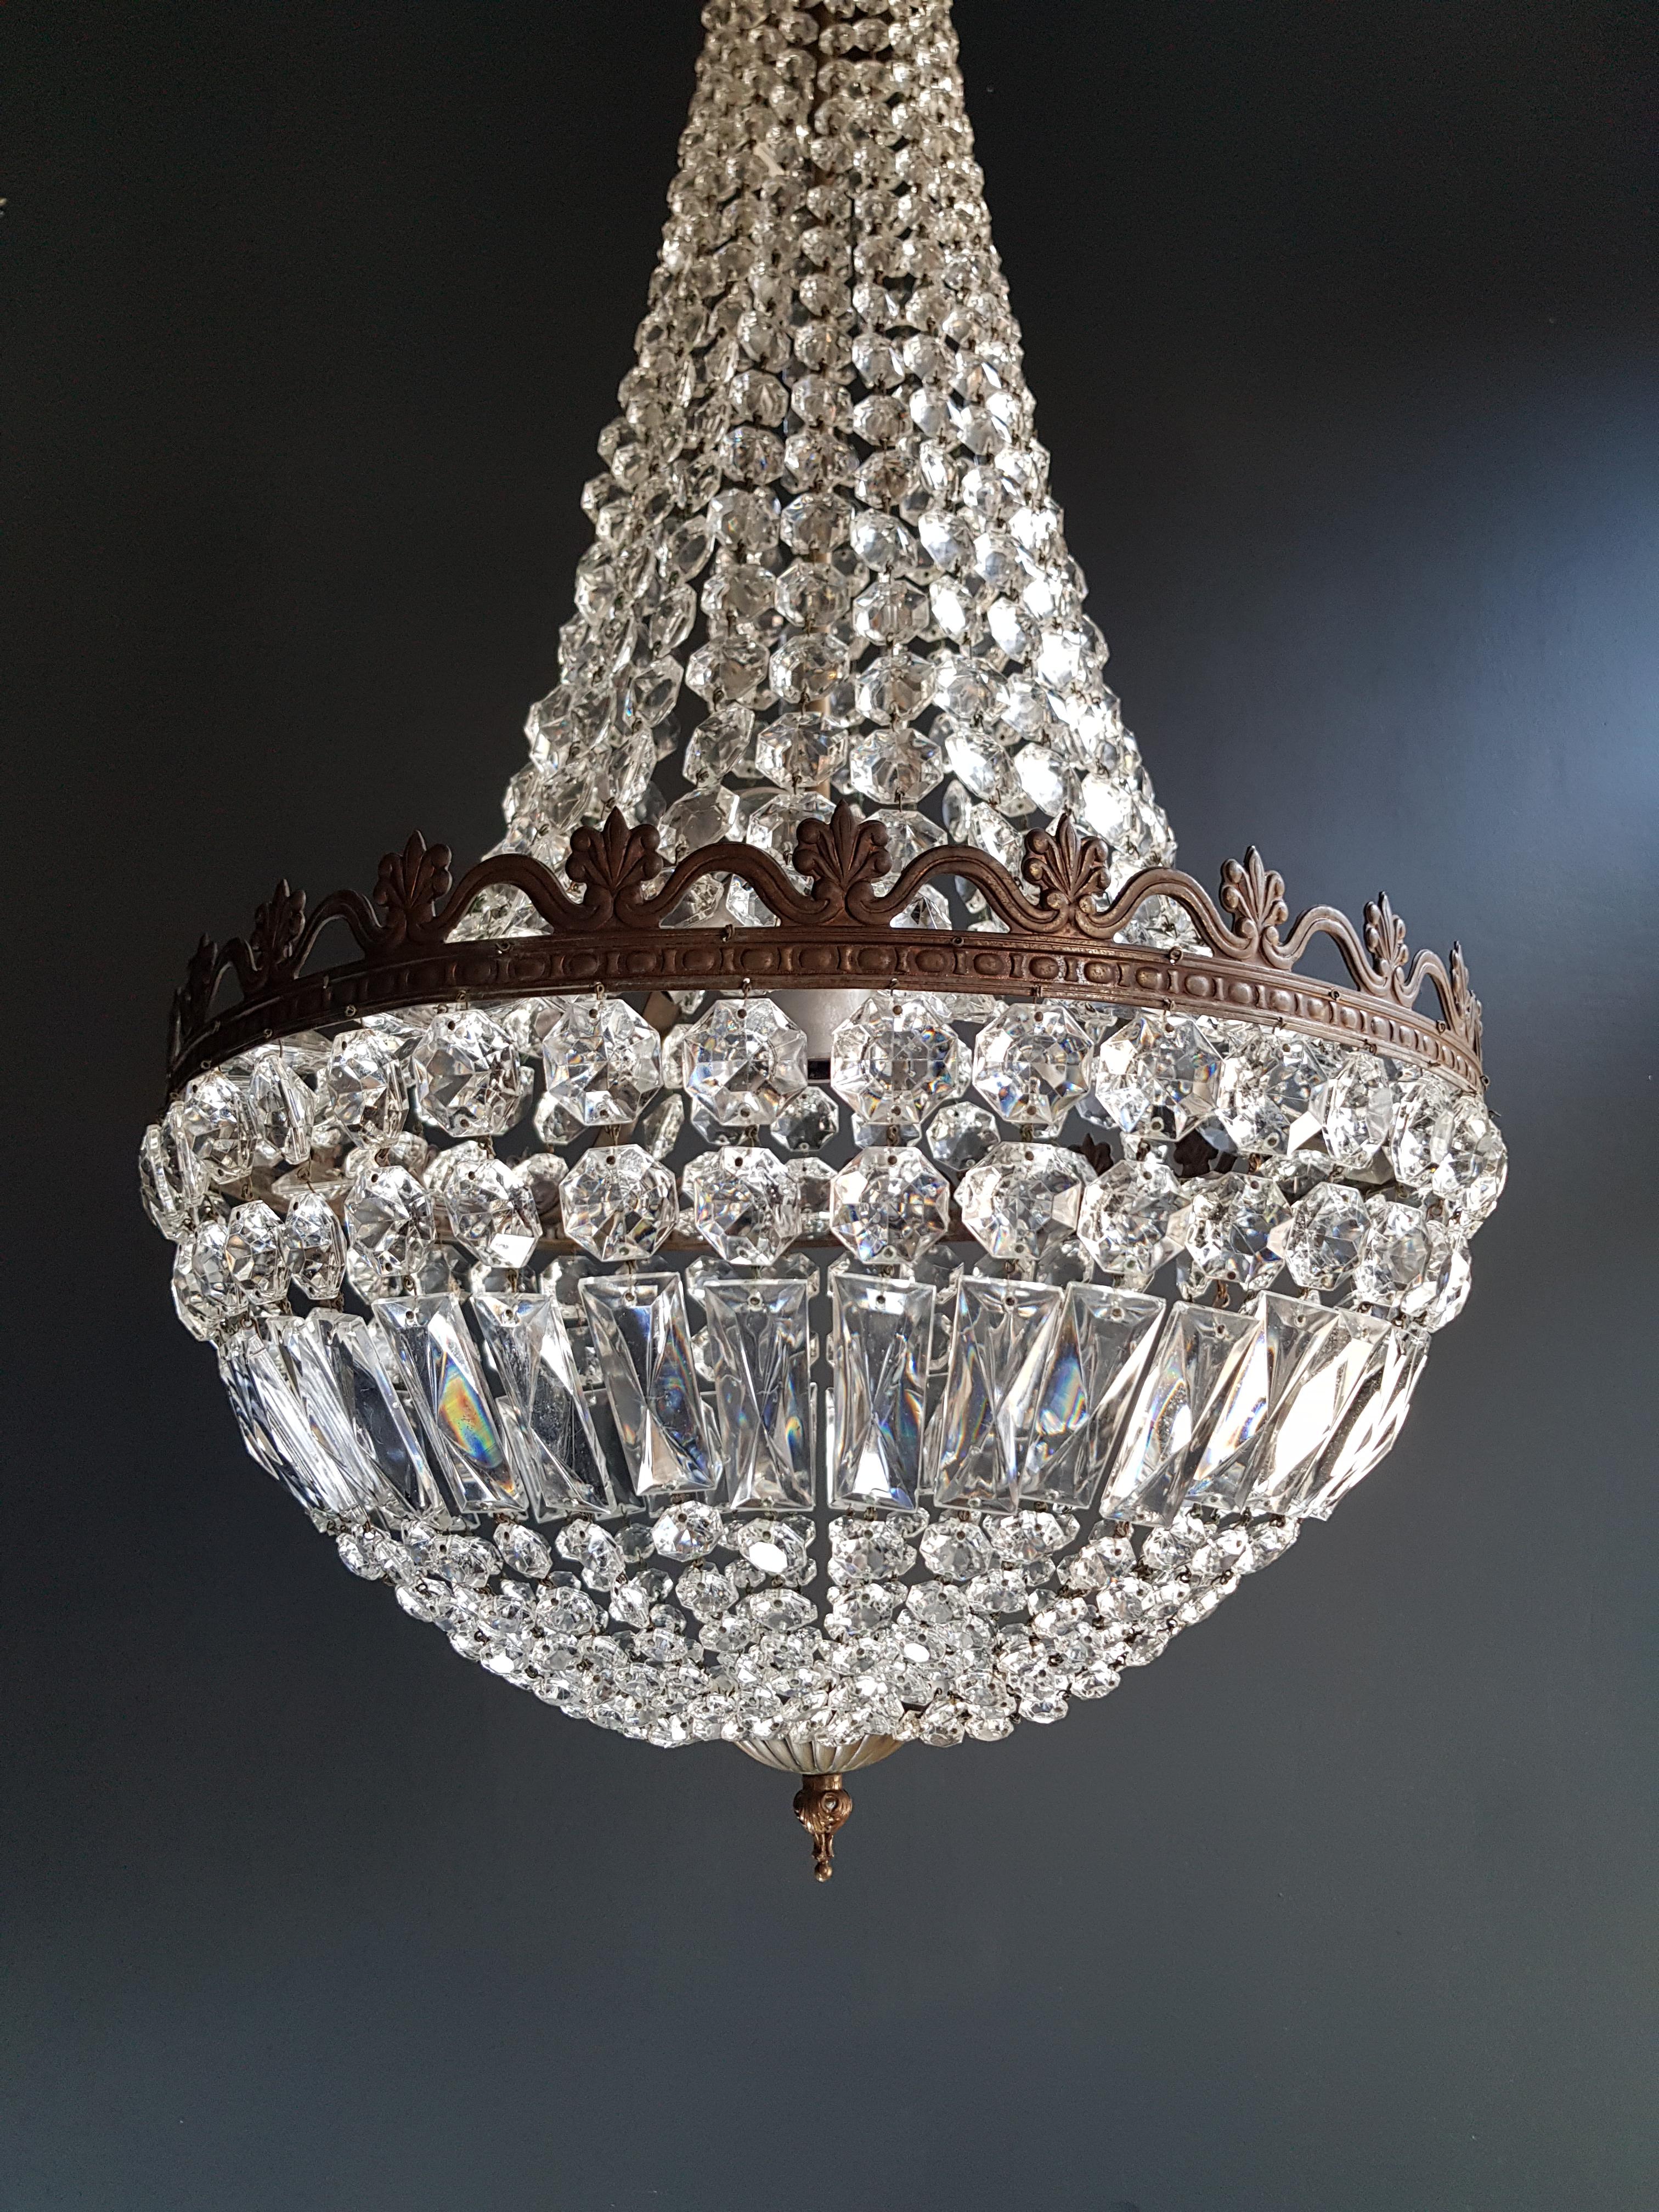 Cabling and sockets completely renewed. Crystal hand knotted
Measures: Total height 110 cm, height without chain: 80 cm, diameter 45 cm, weight (approximately) 6 kg.

Number of lights: 4-light bulb sockets: 3x E14 and 1 x E27

Montgolfiè Empire